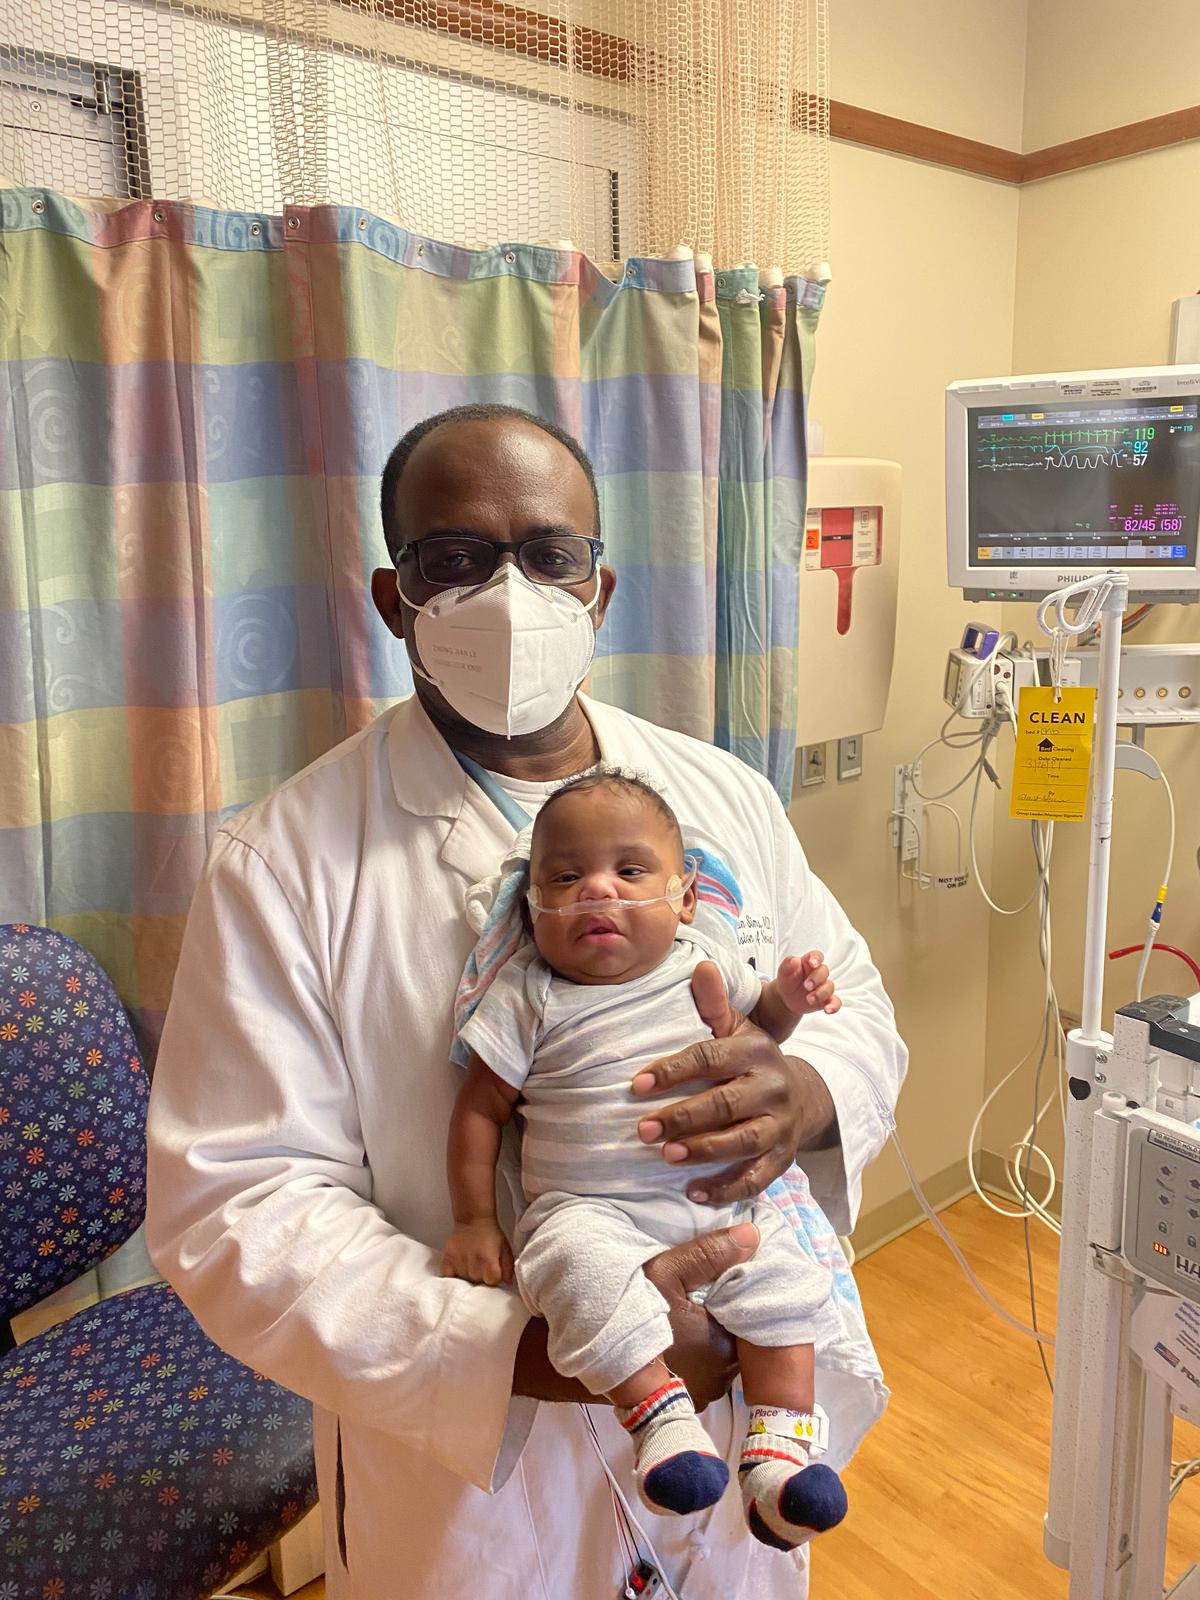 Dr. Brian Sims and Curtis during his stay in the NICU. (Courtesy of <a href="https://www.uab.edu/home/">UAB</a>)